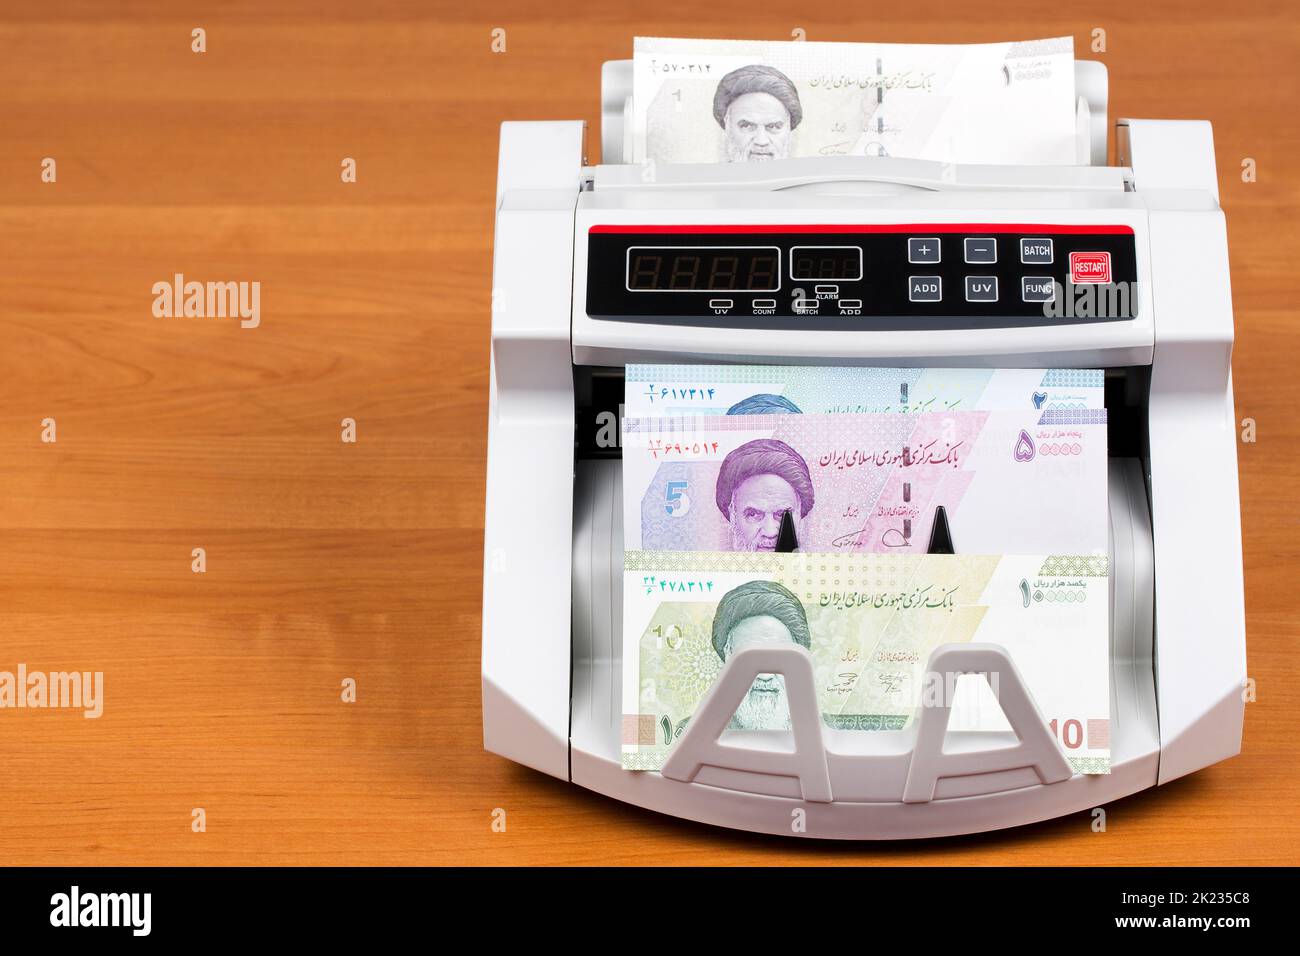 Iranian money - Toman in the counting machine Stock Photo